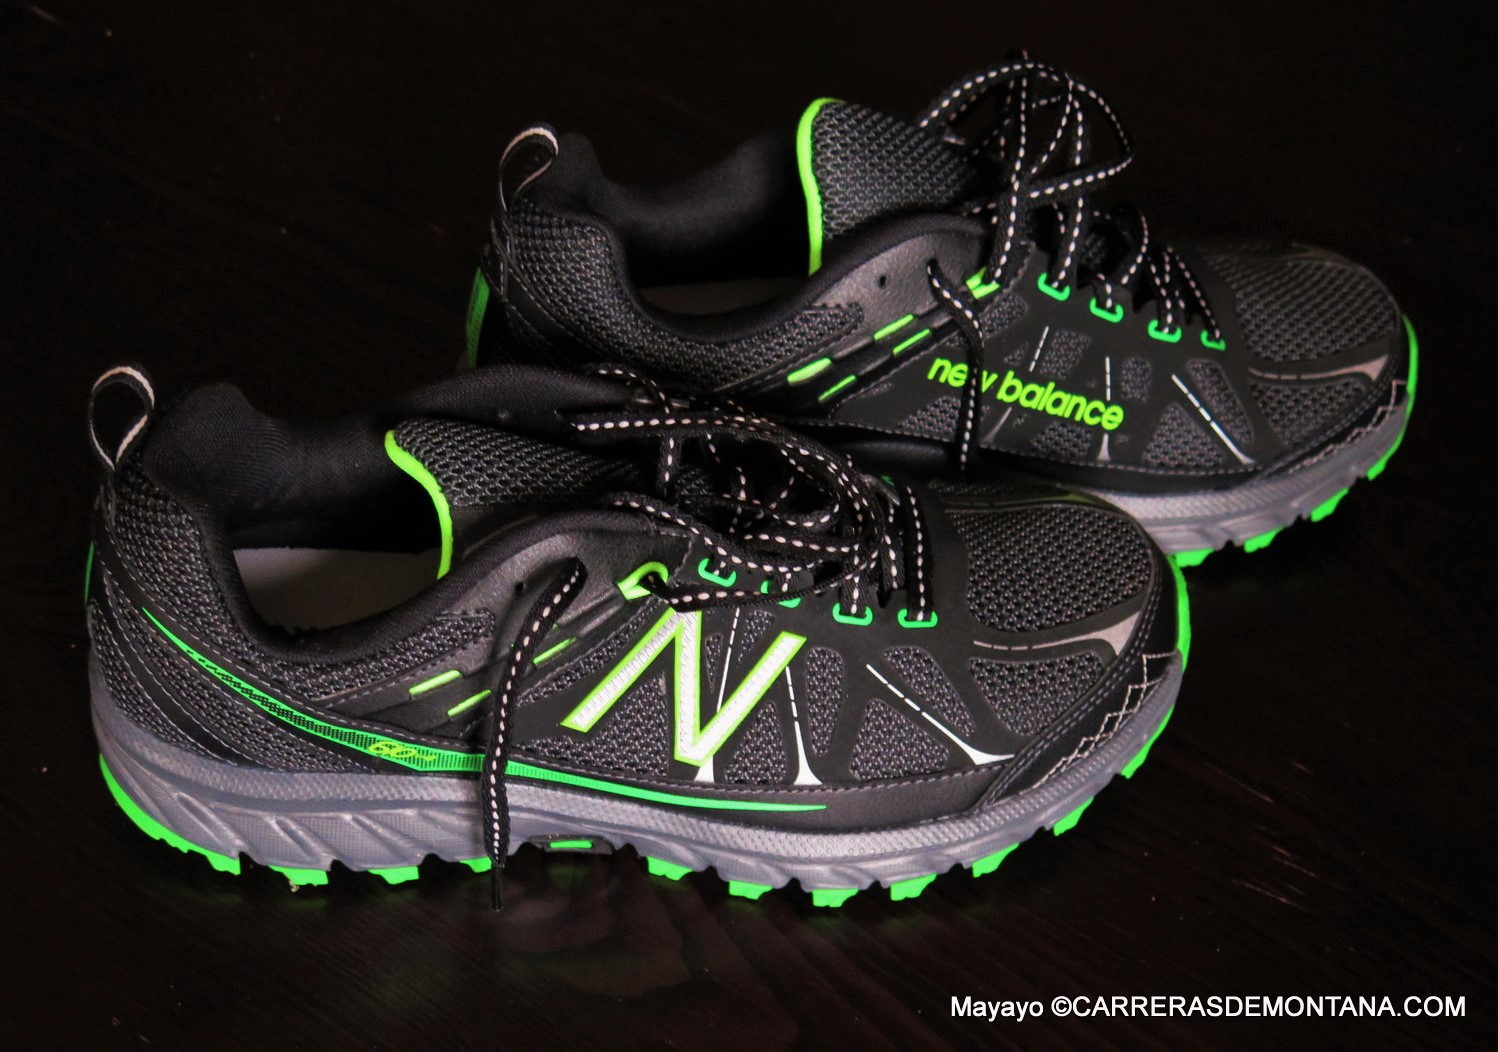 new balance mt610 review